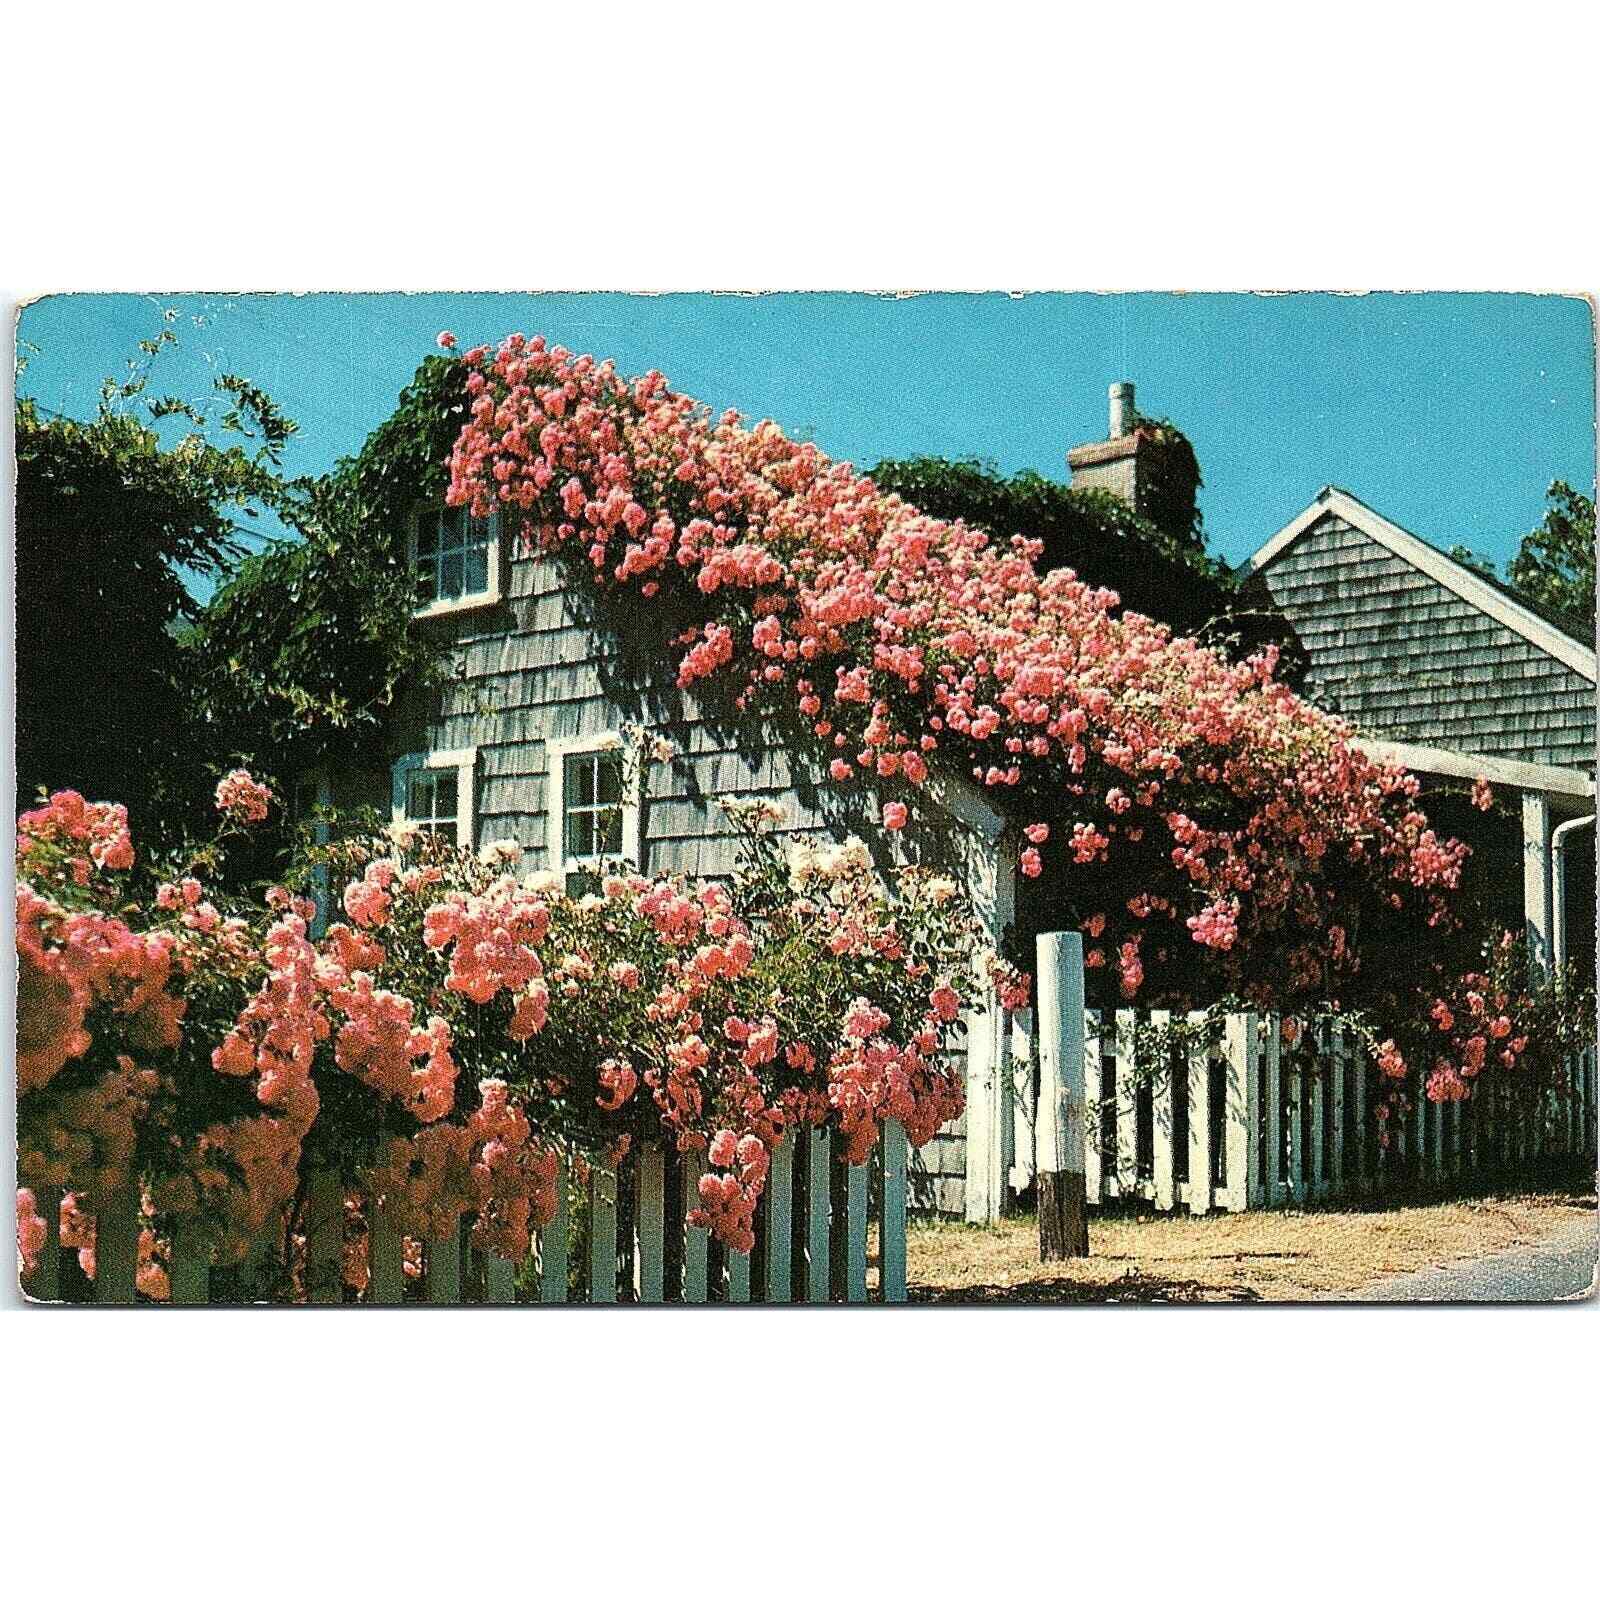 Typical Rose Covered Cottage Siasconset, MA Postcard